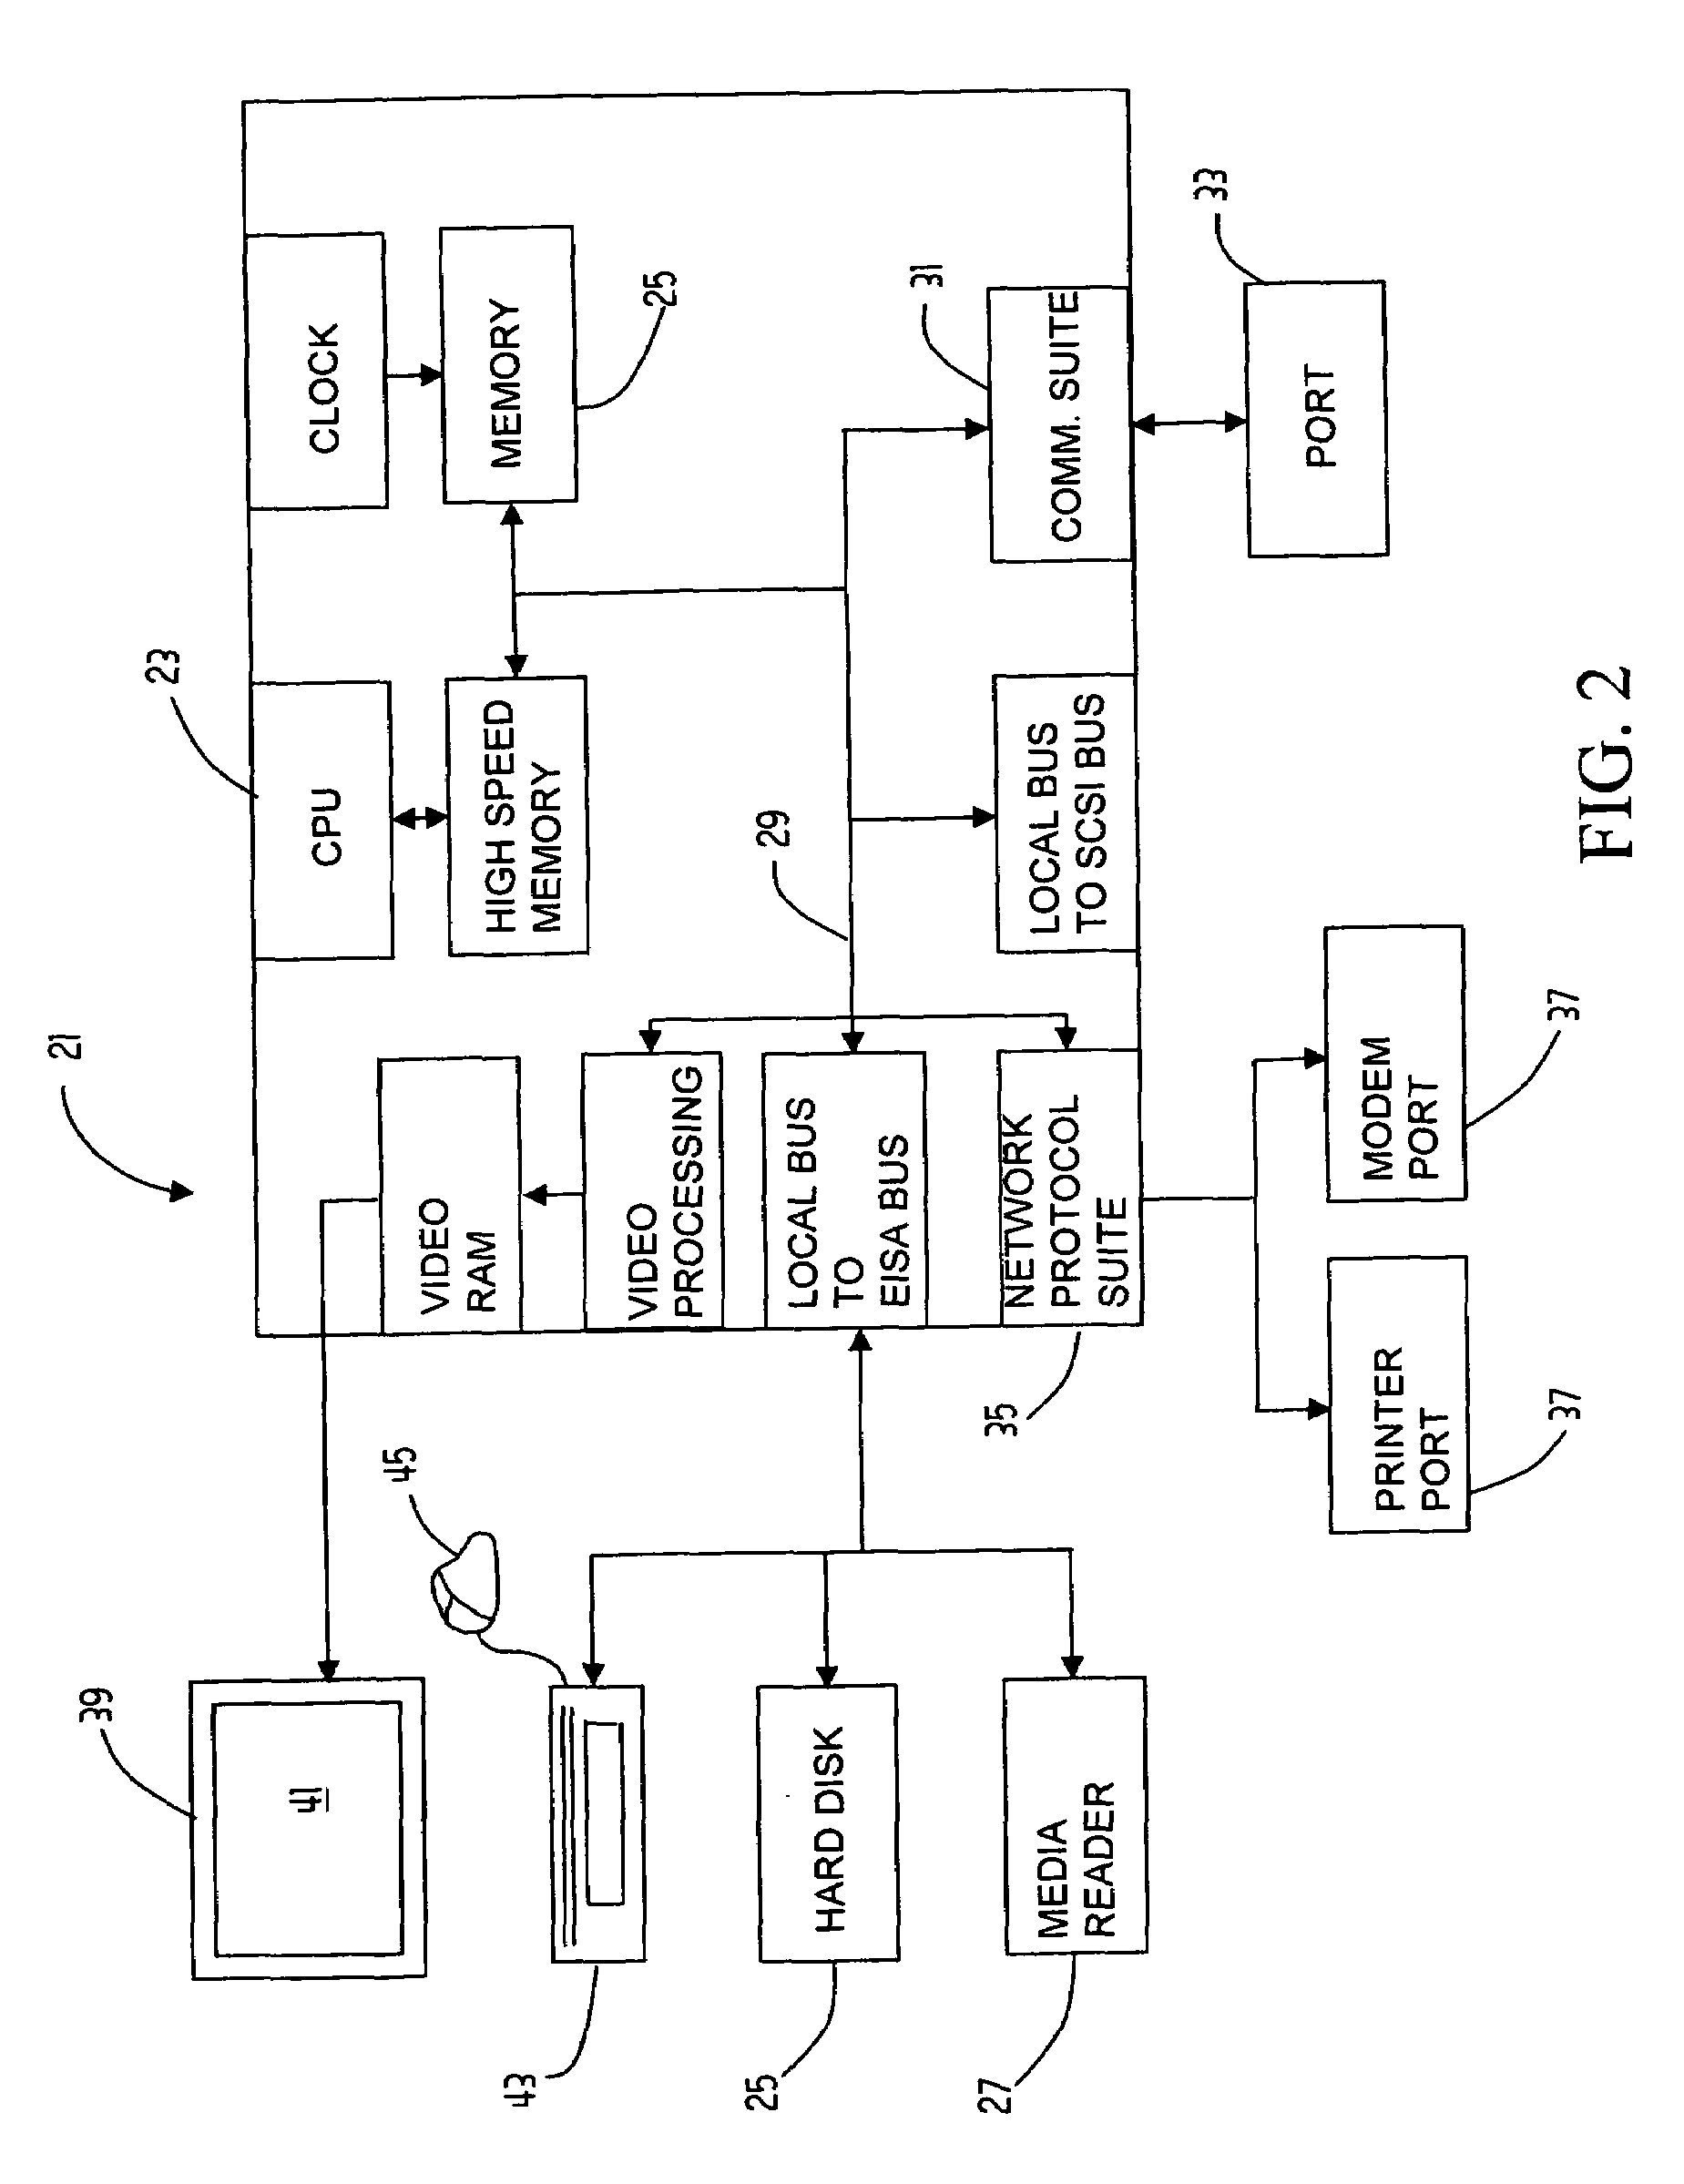 Device emulation for testing data network configurations